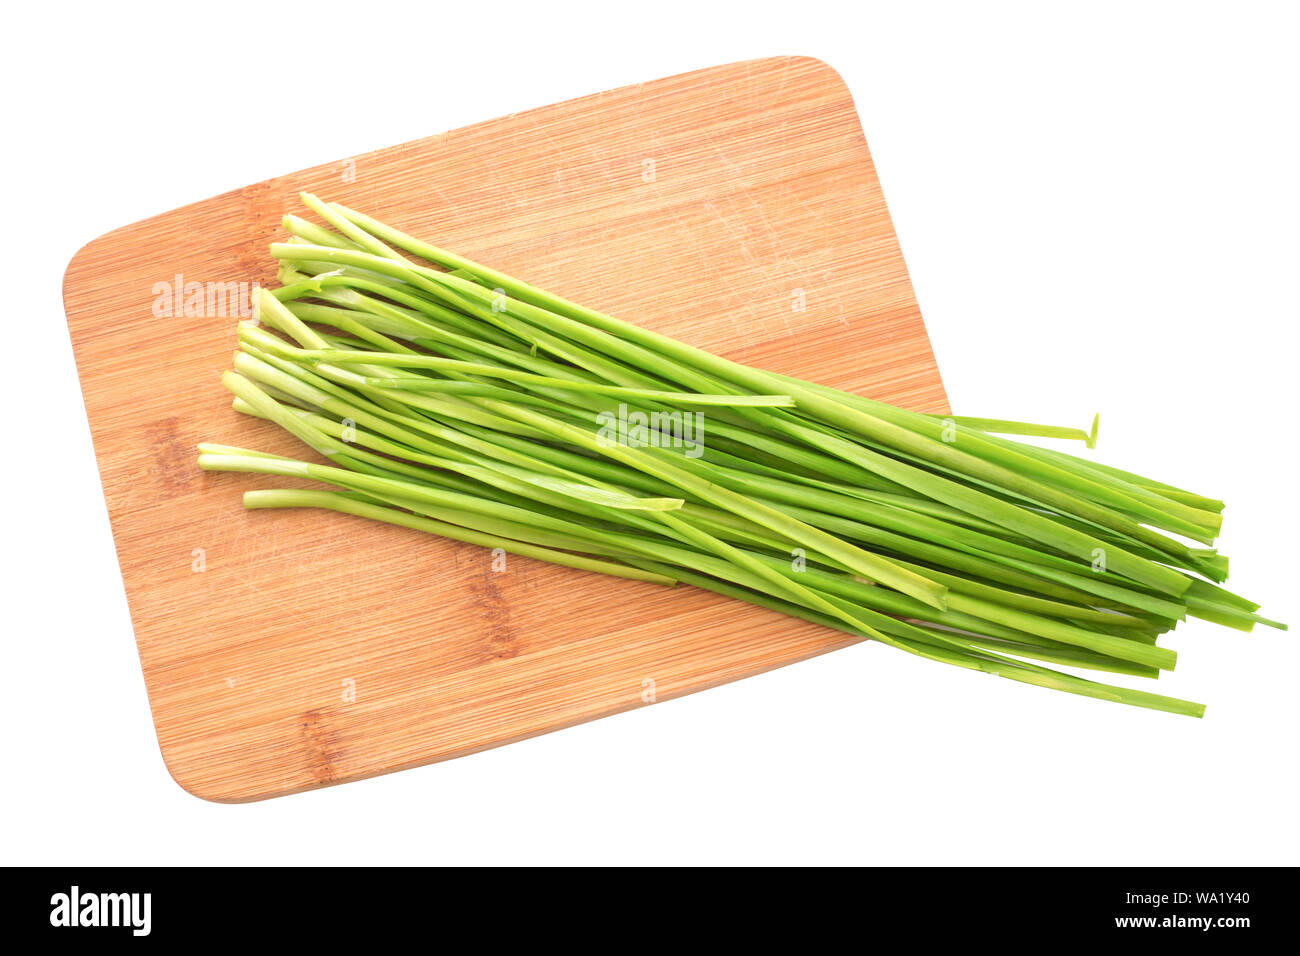 Bunch of chives on white background Stock Photo - Alamy